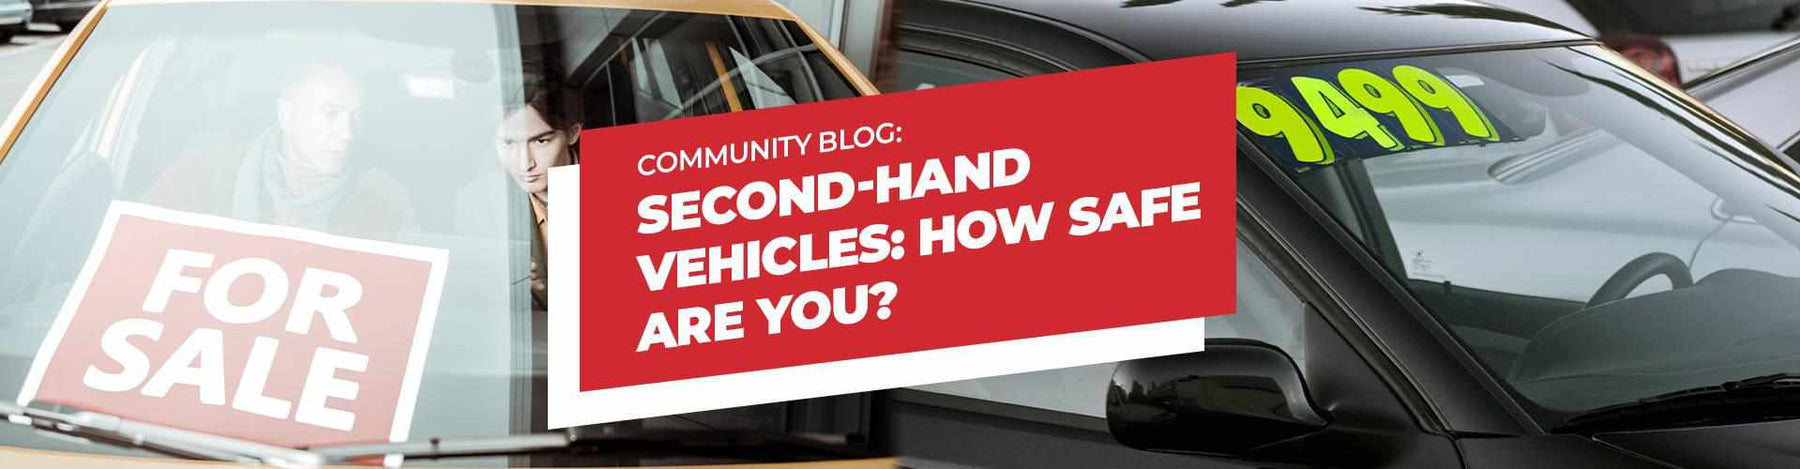 Second-Hand Vehicles: How Safe Are You? - - BlackboxMyCar